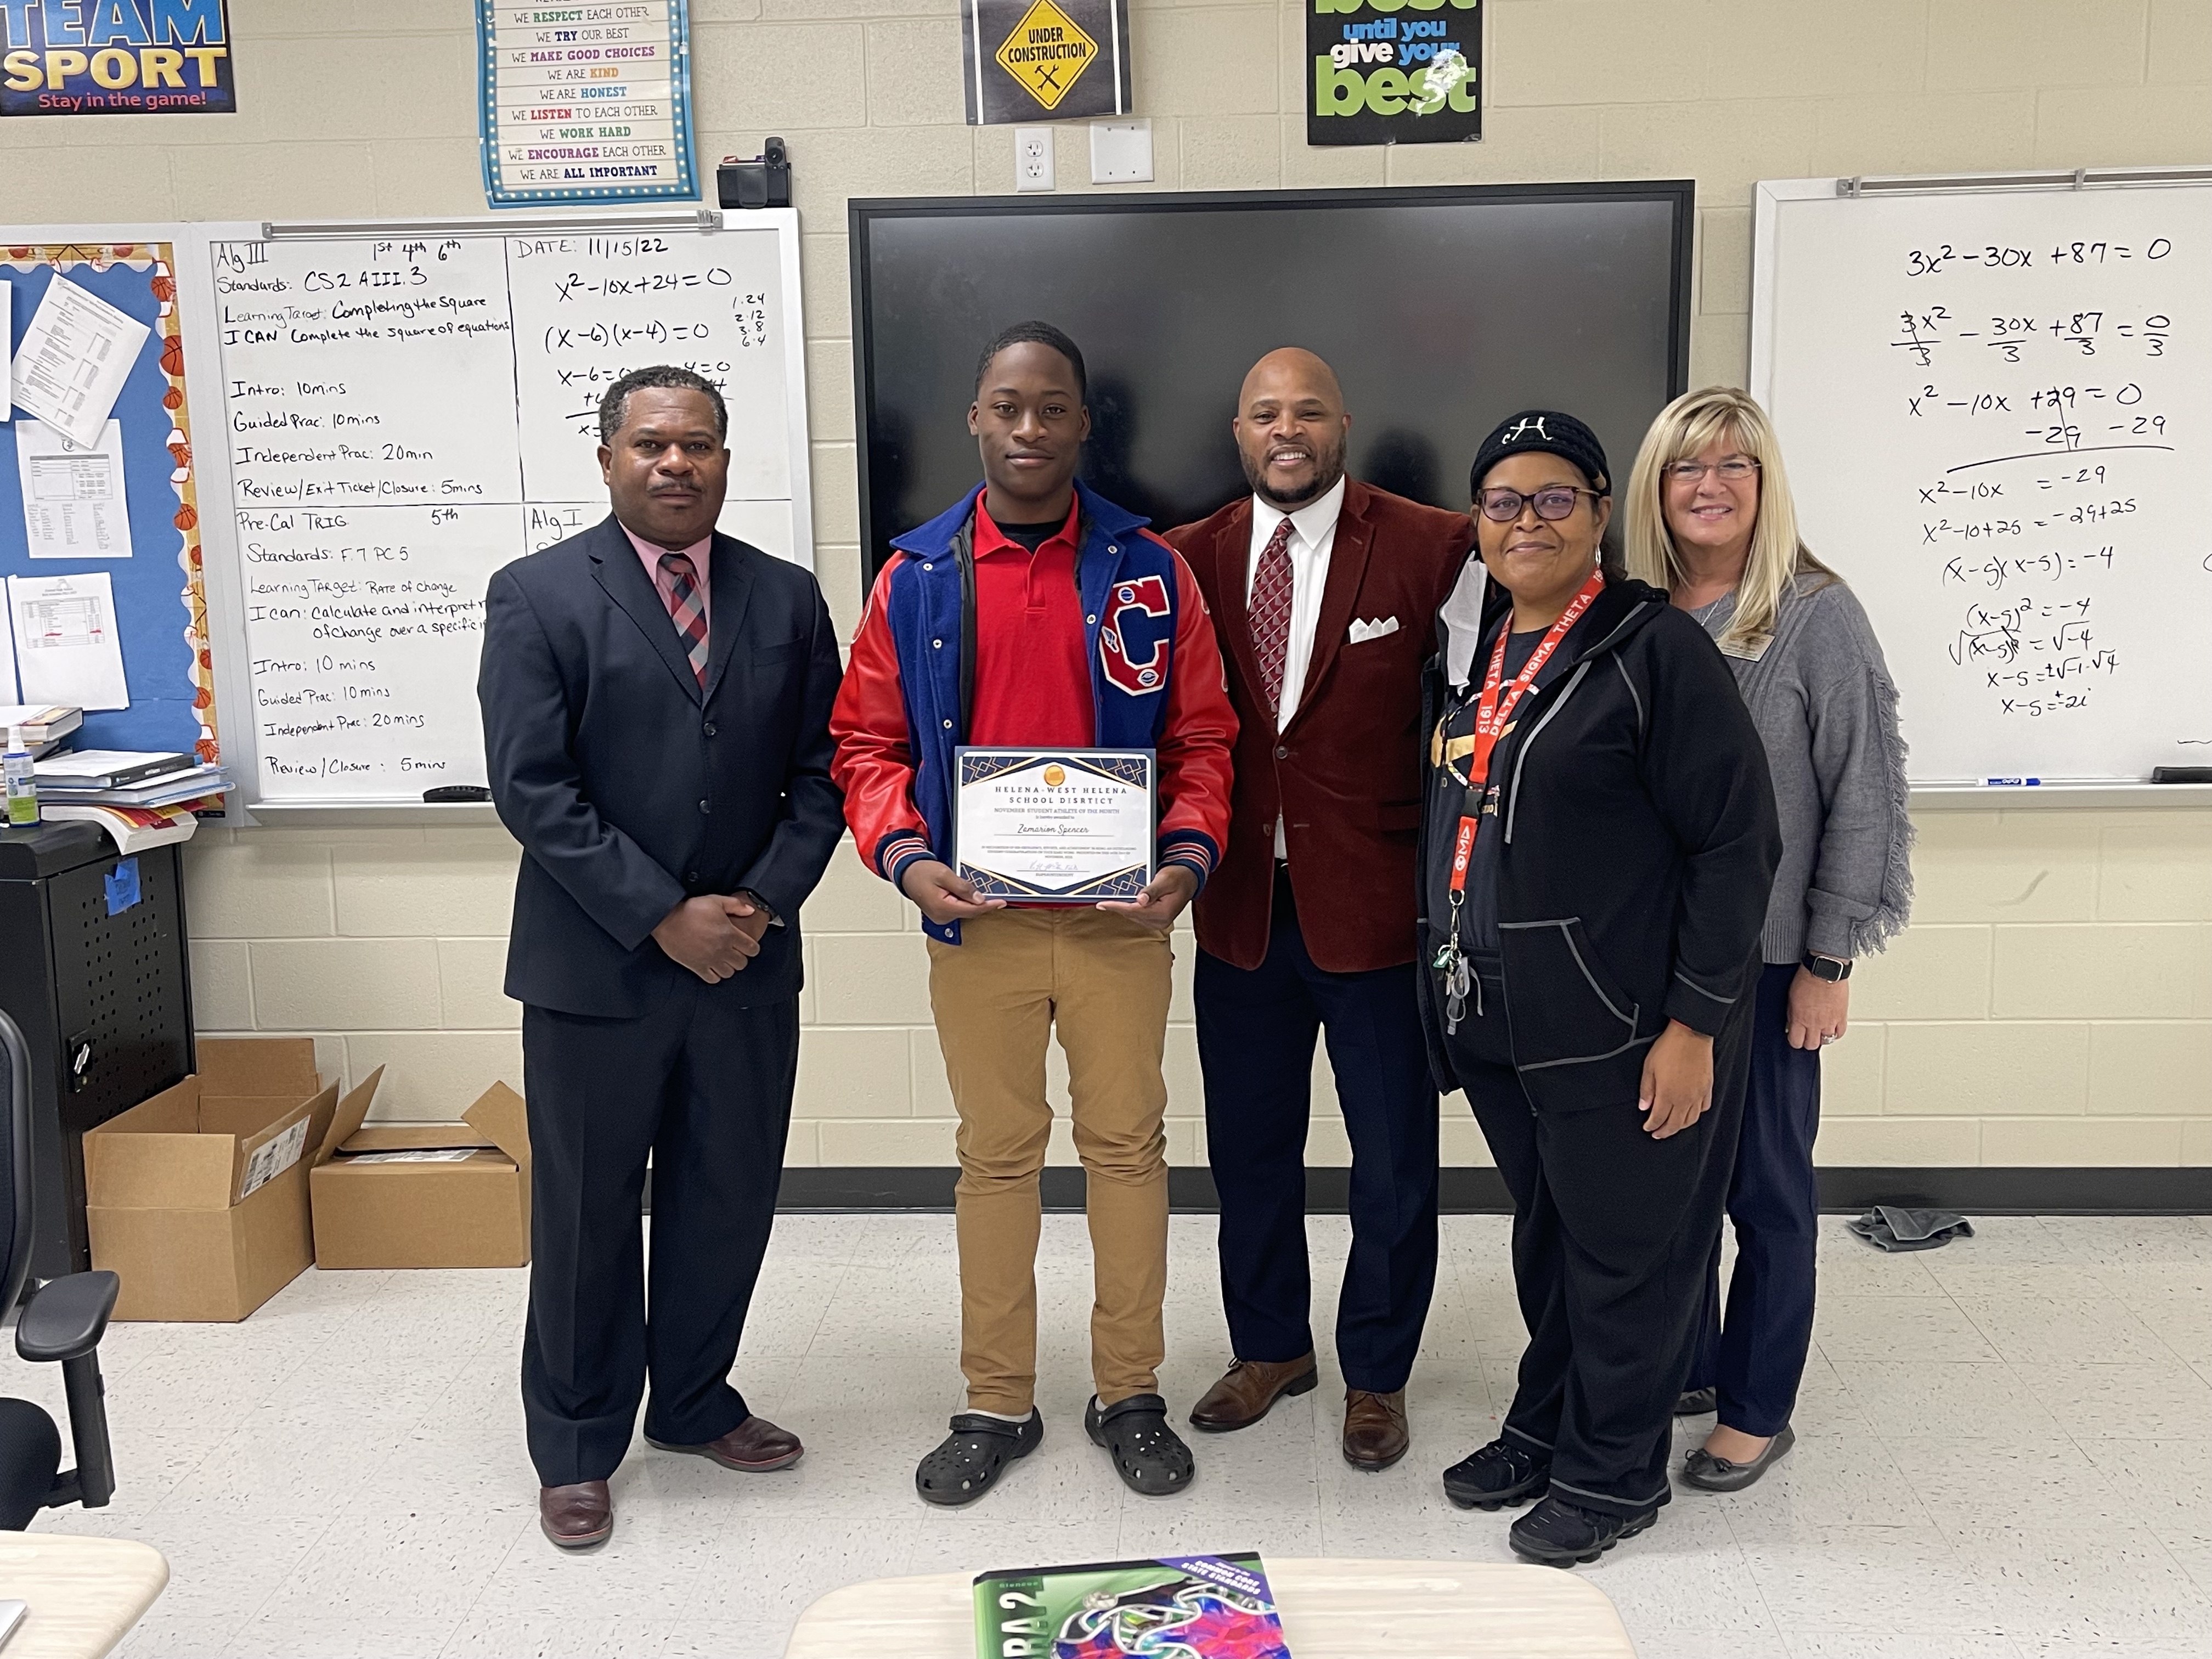 Central High School  Sr. High Athlete of the Month is Zamarion Spencer. Zamarion was the starting quarterback and defensive back for the Sr. High football team. He was a team captain and showed outstanding leadership throughout the season. He was on the honor roll for the 1st 9 weeks.